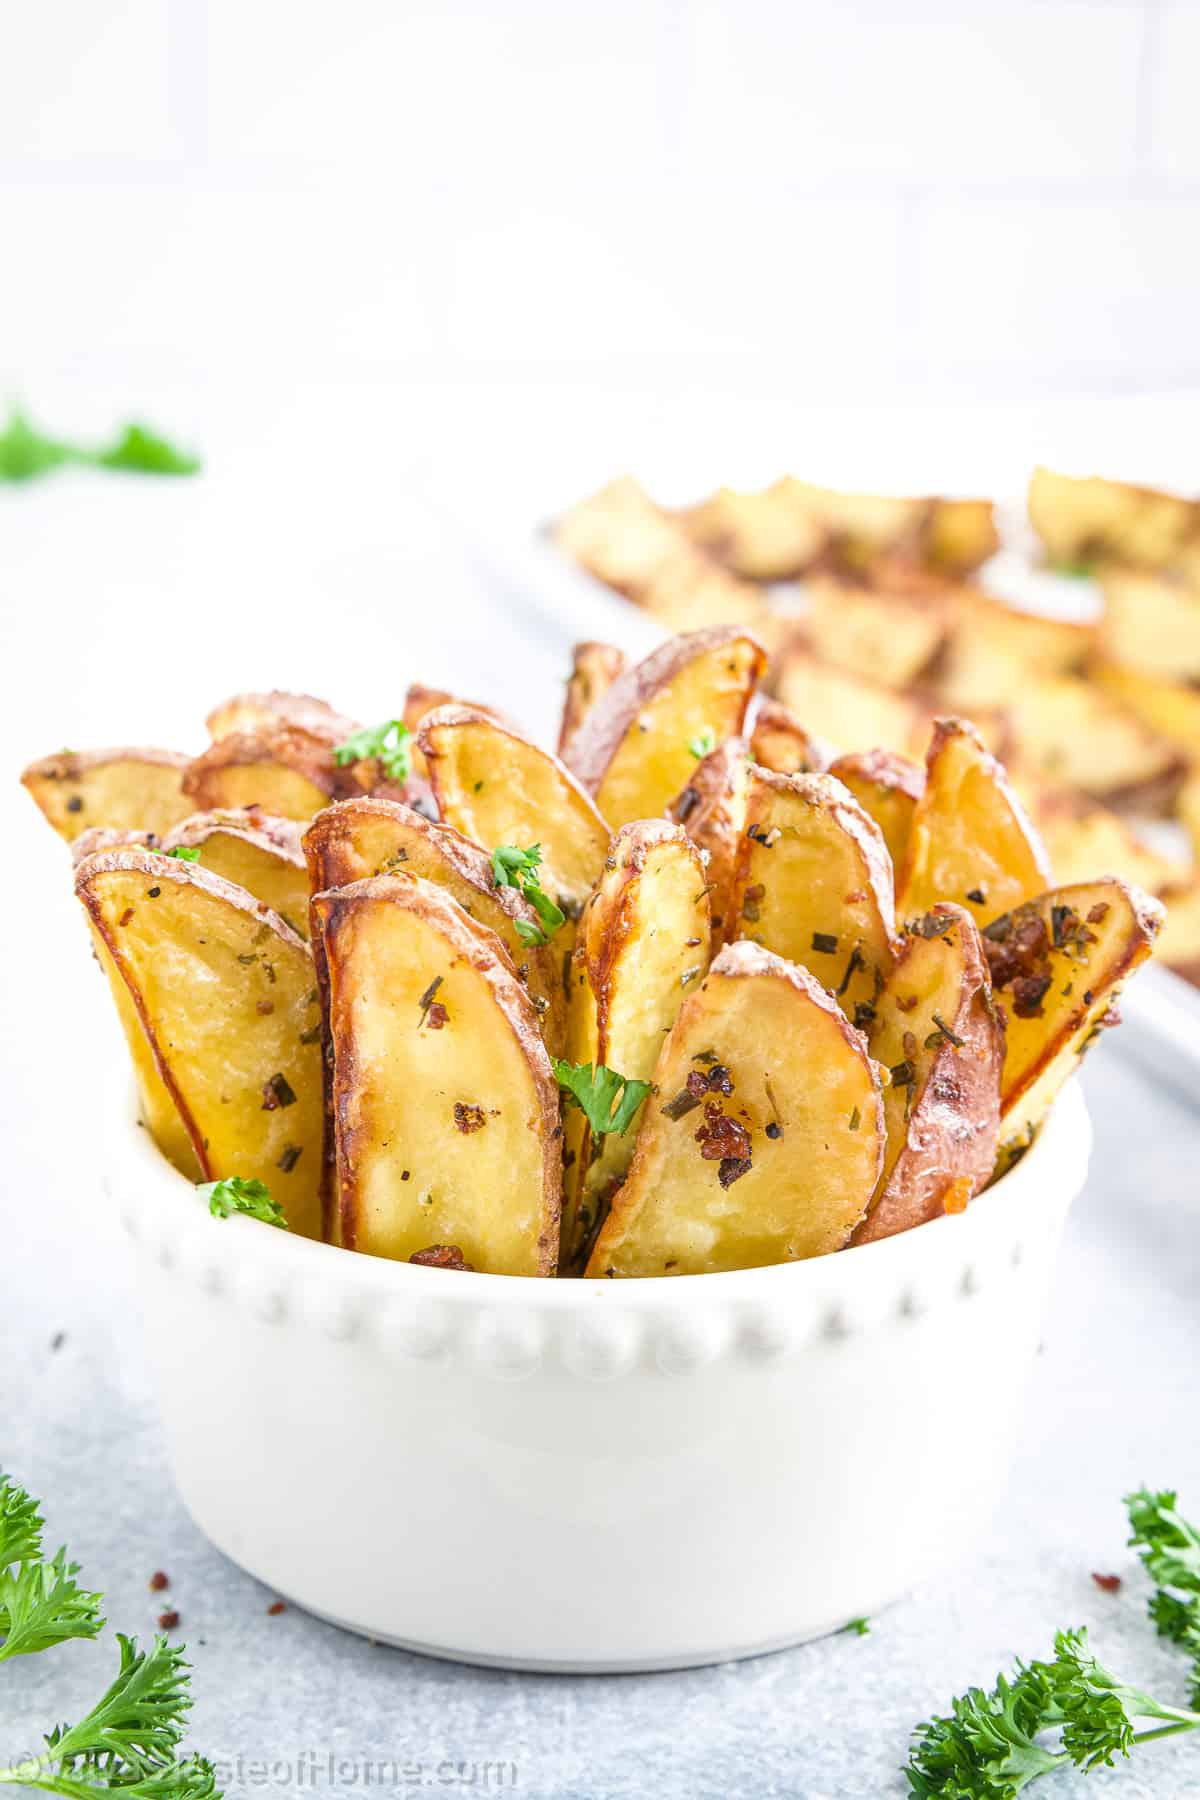 This roasted potato wedge recipe is a game-changer in its simplicity. With just three ingredients, you'll achieve a side dish that's quick and easy.